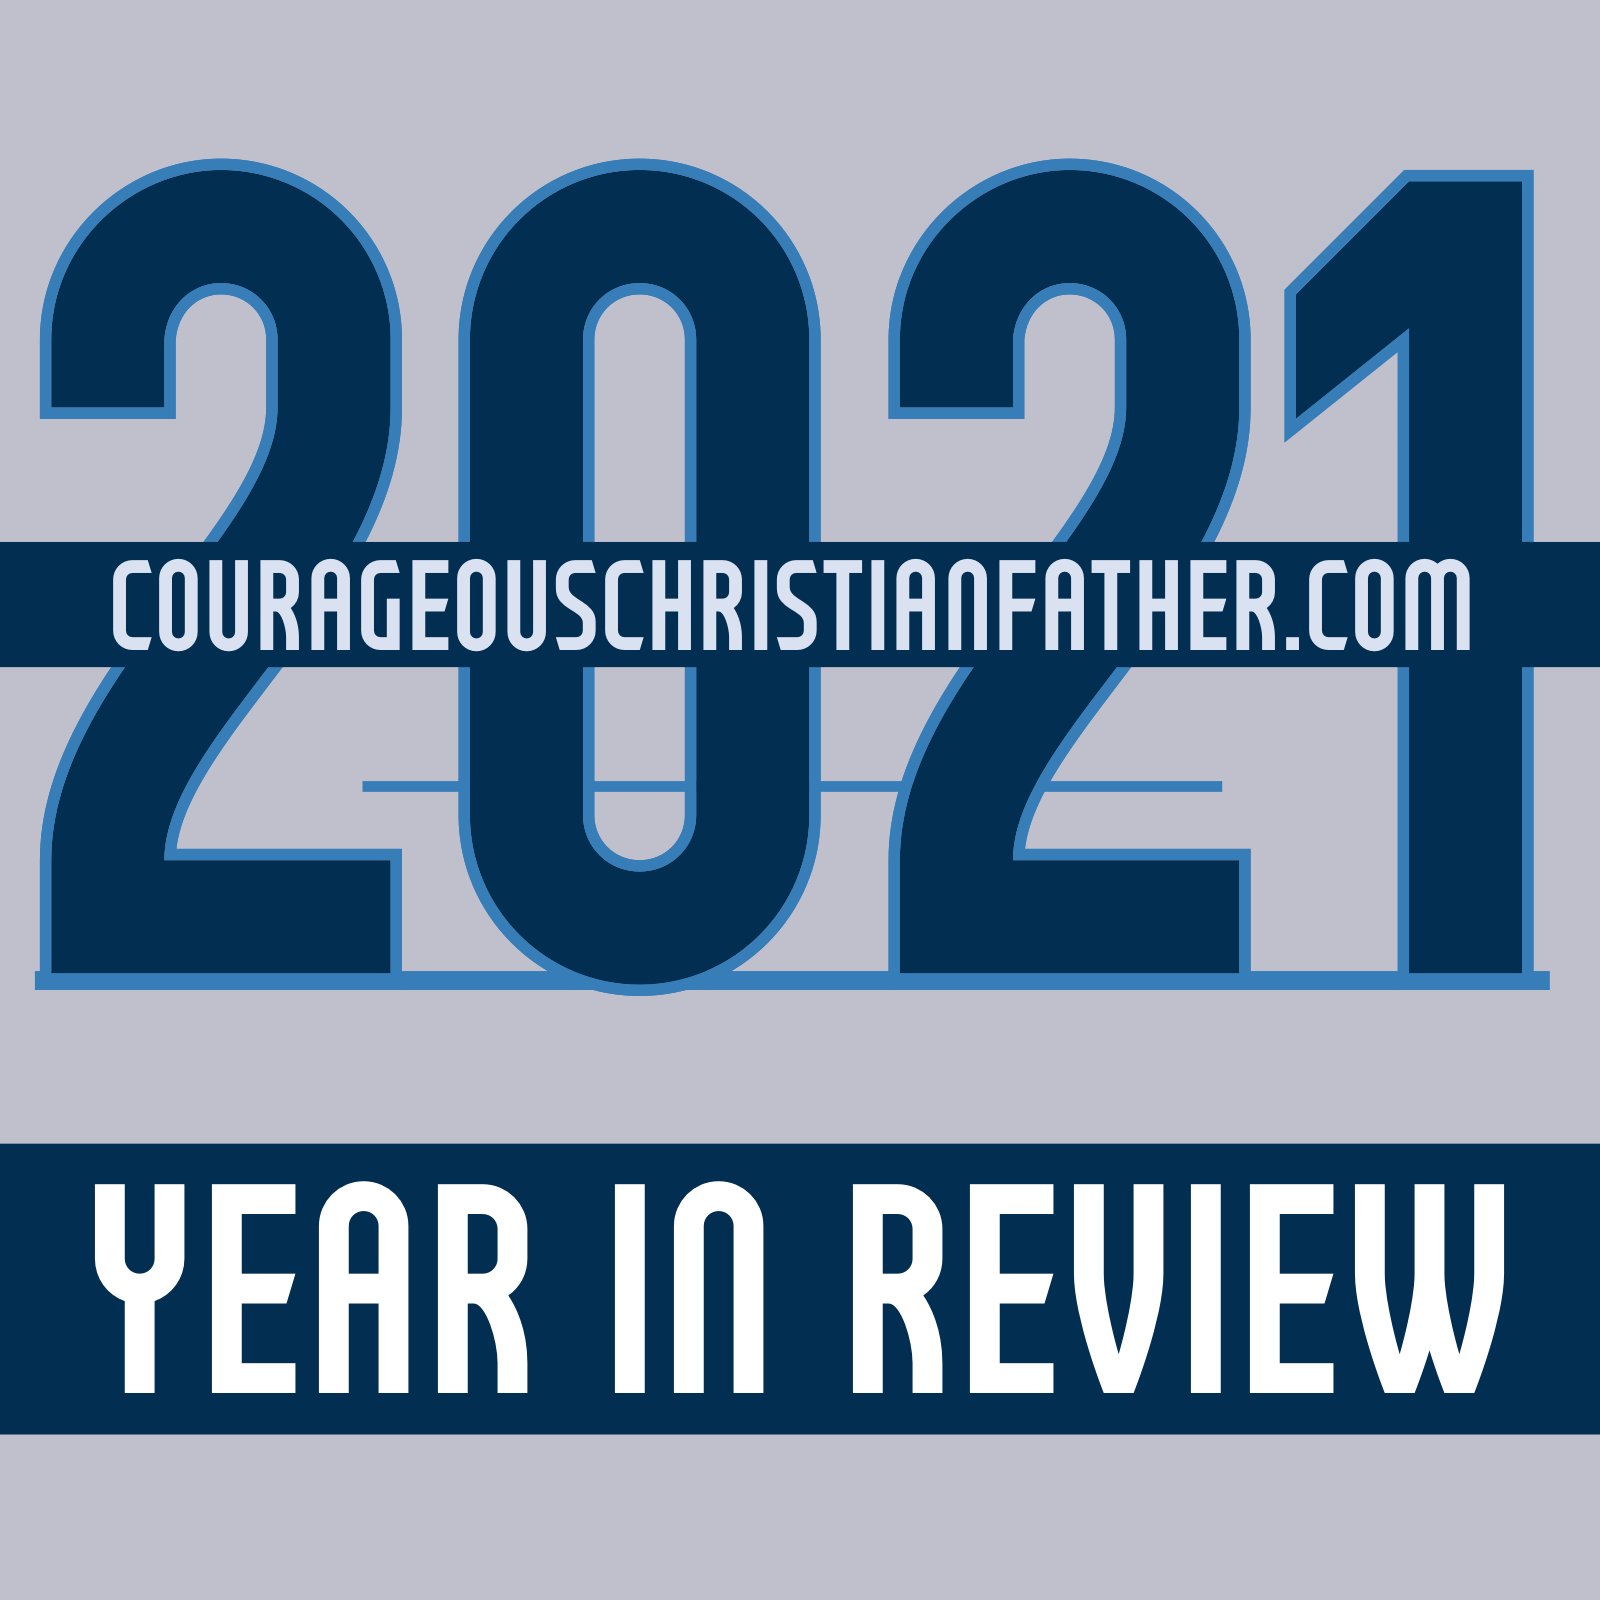 2021 year in review - Check out the states and fireworks that Courageous Christian Father had in 2021.